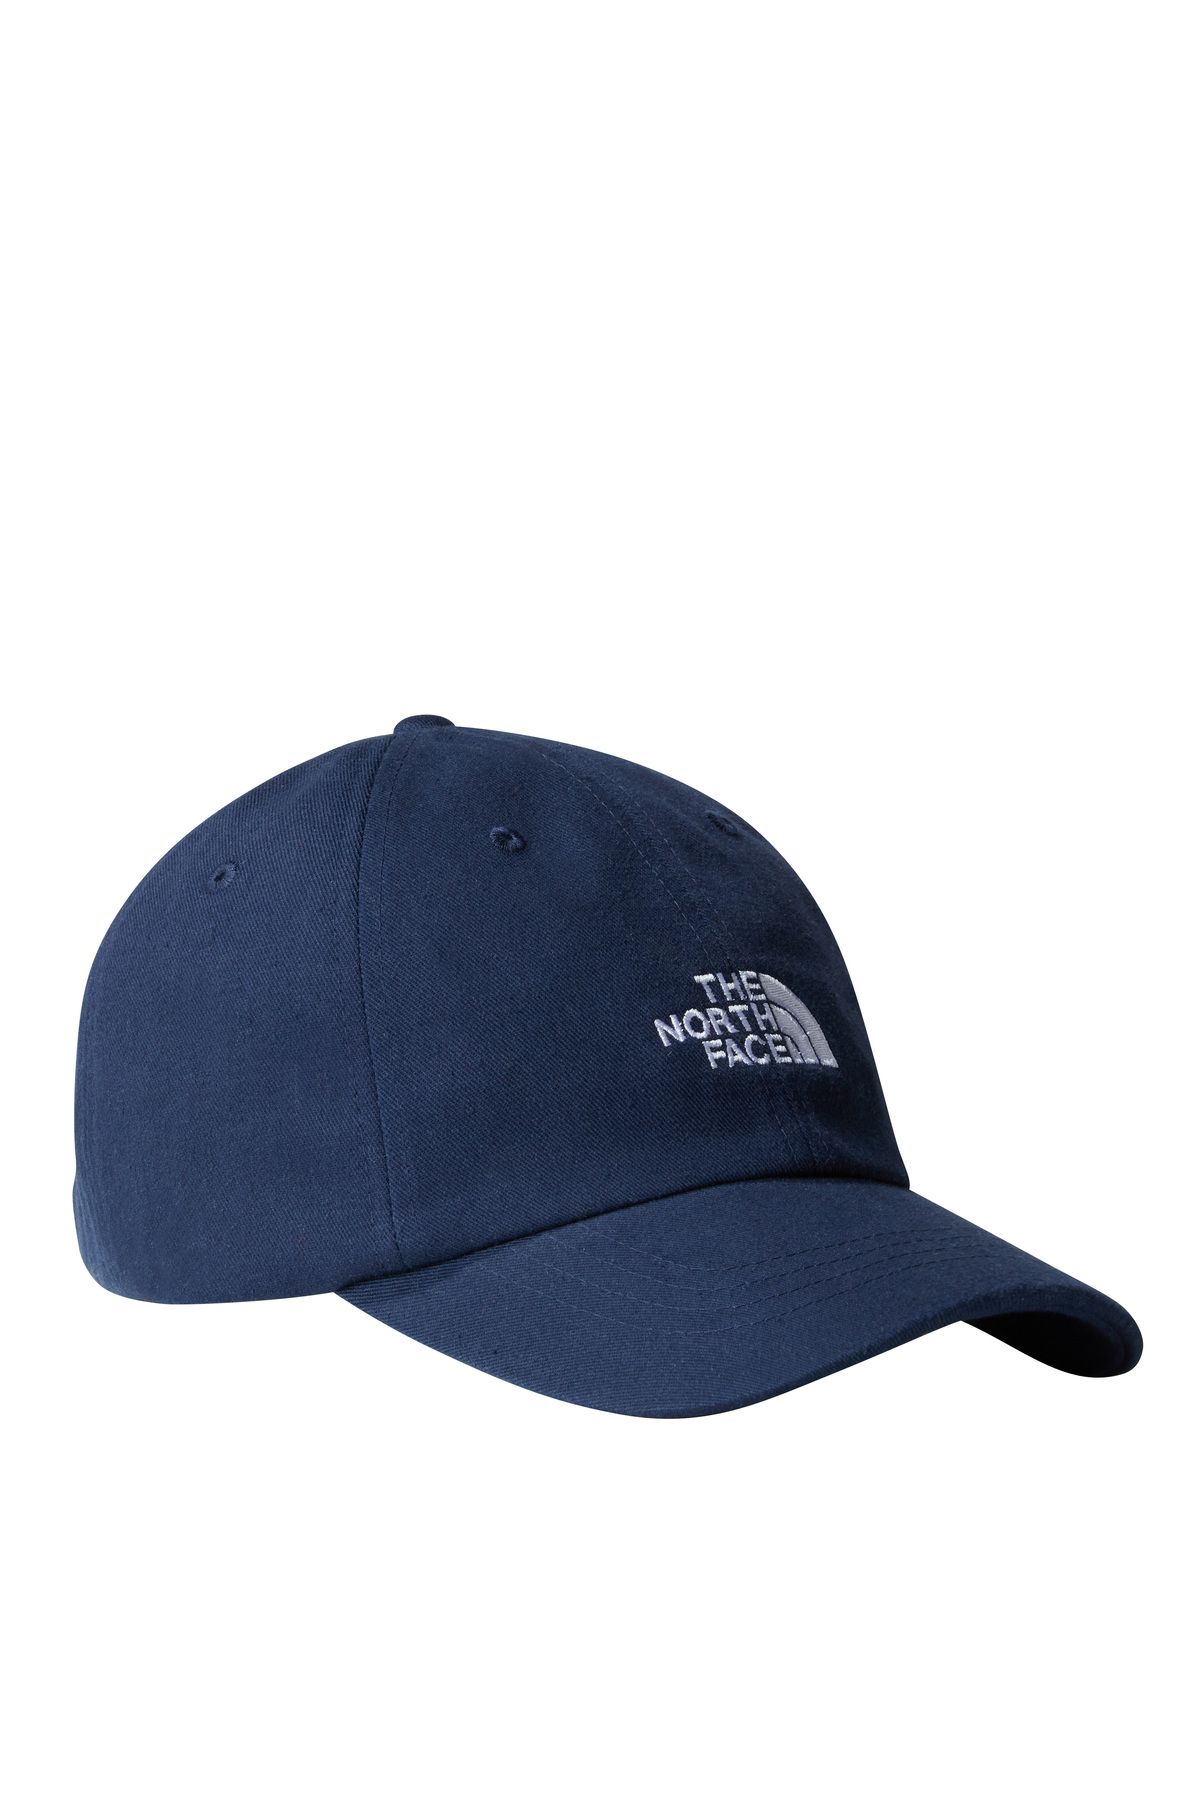 The North Face Norm Hat Unisex Lacivert Şapka Nf0a7who8k21